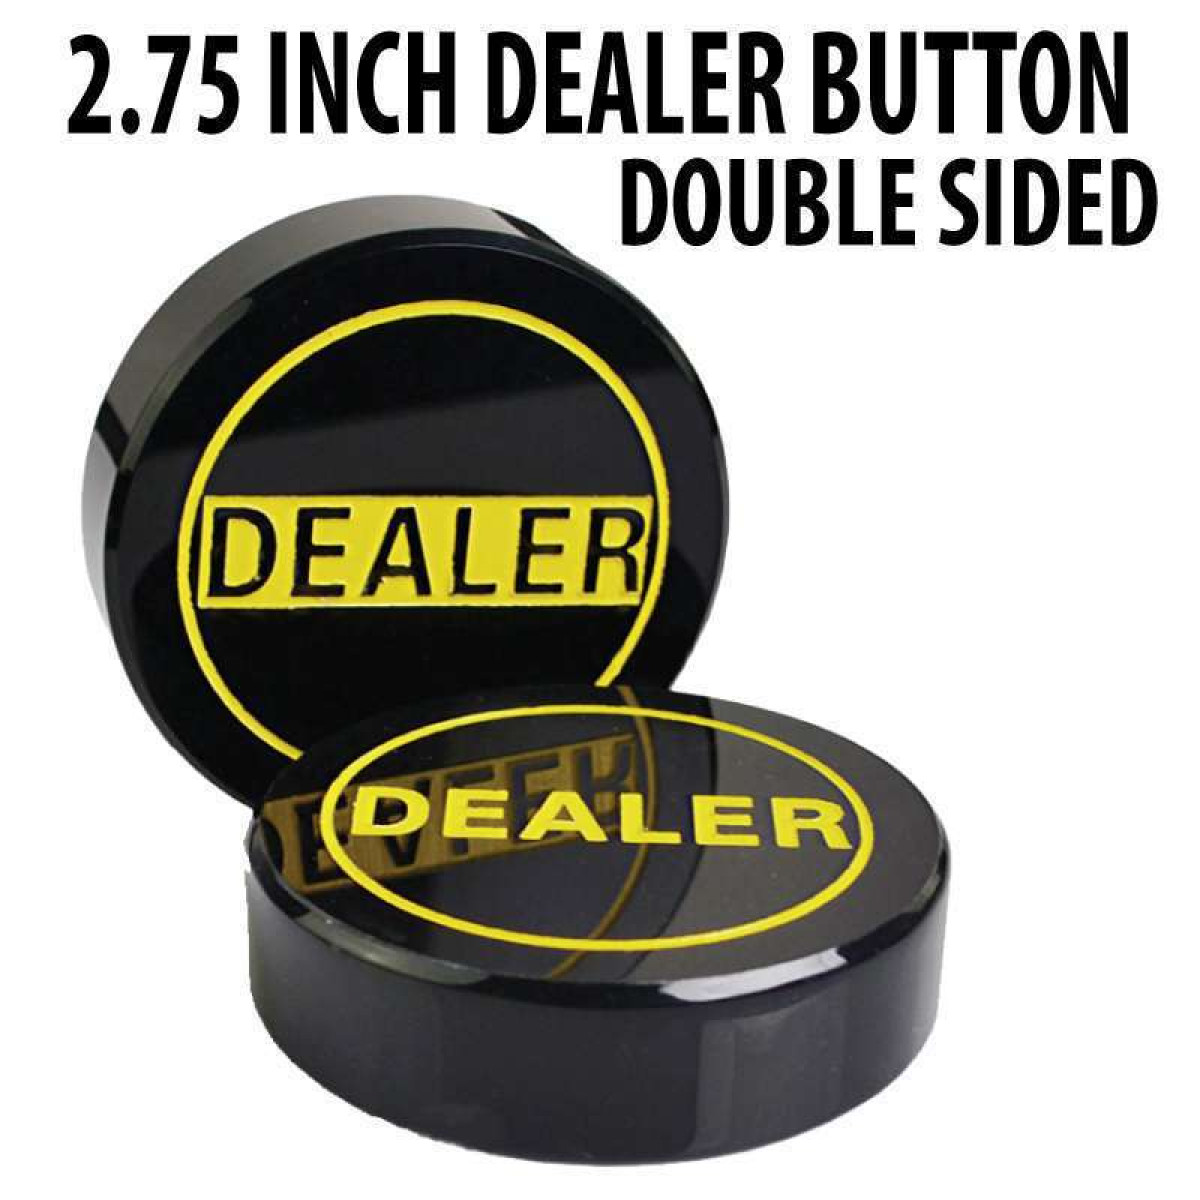 Double Sided Black Copag Poker Dealer Button Comes with 2 Free Blind Buttons! 